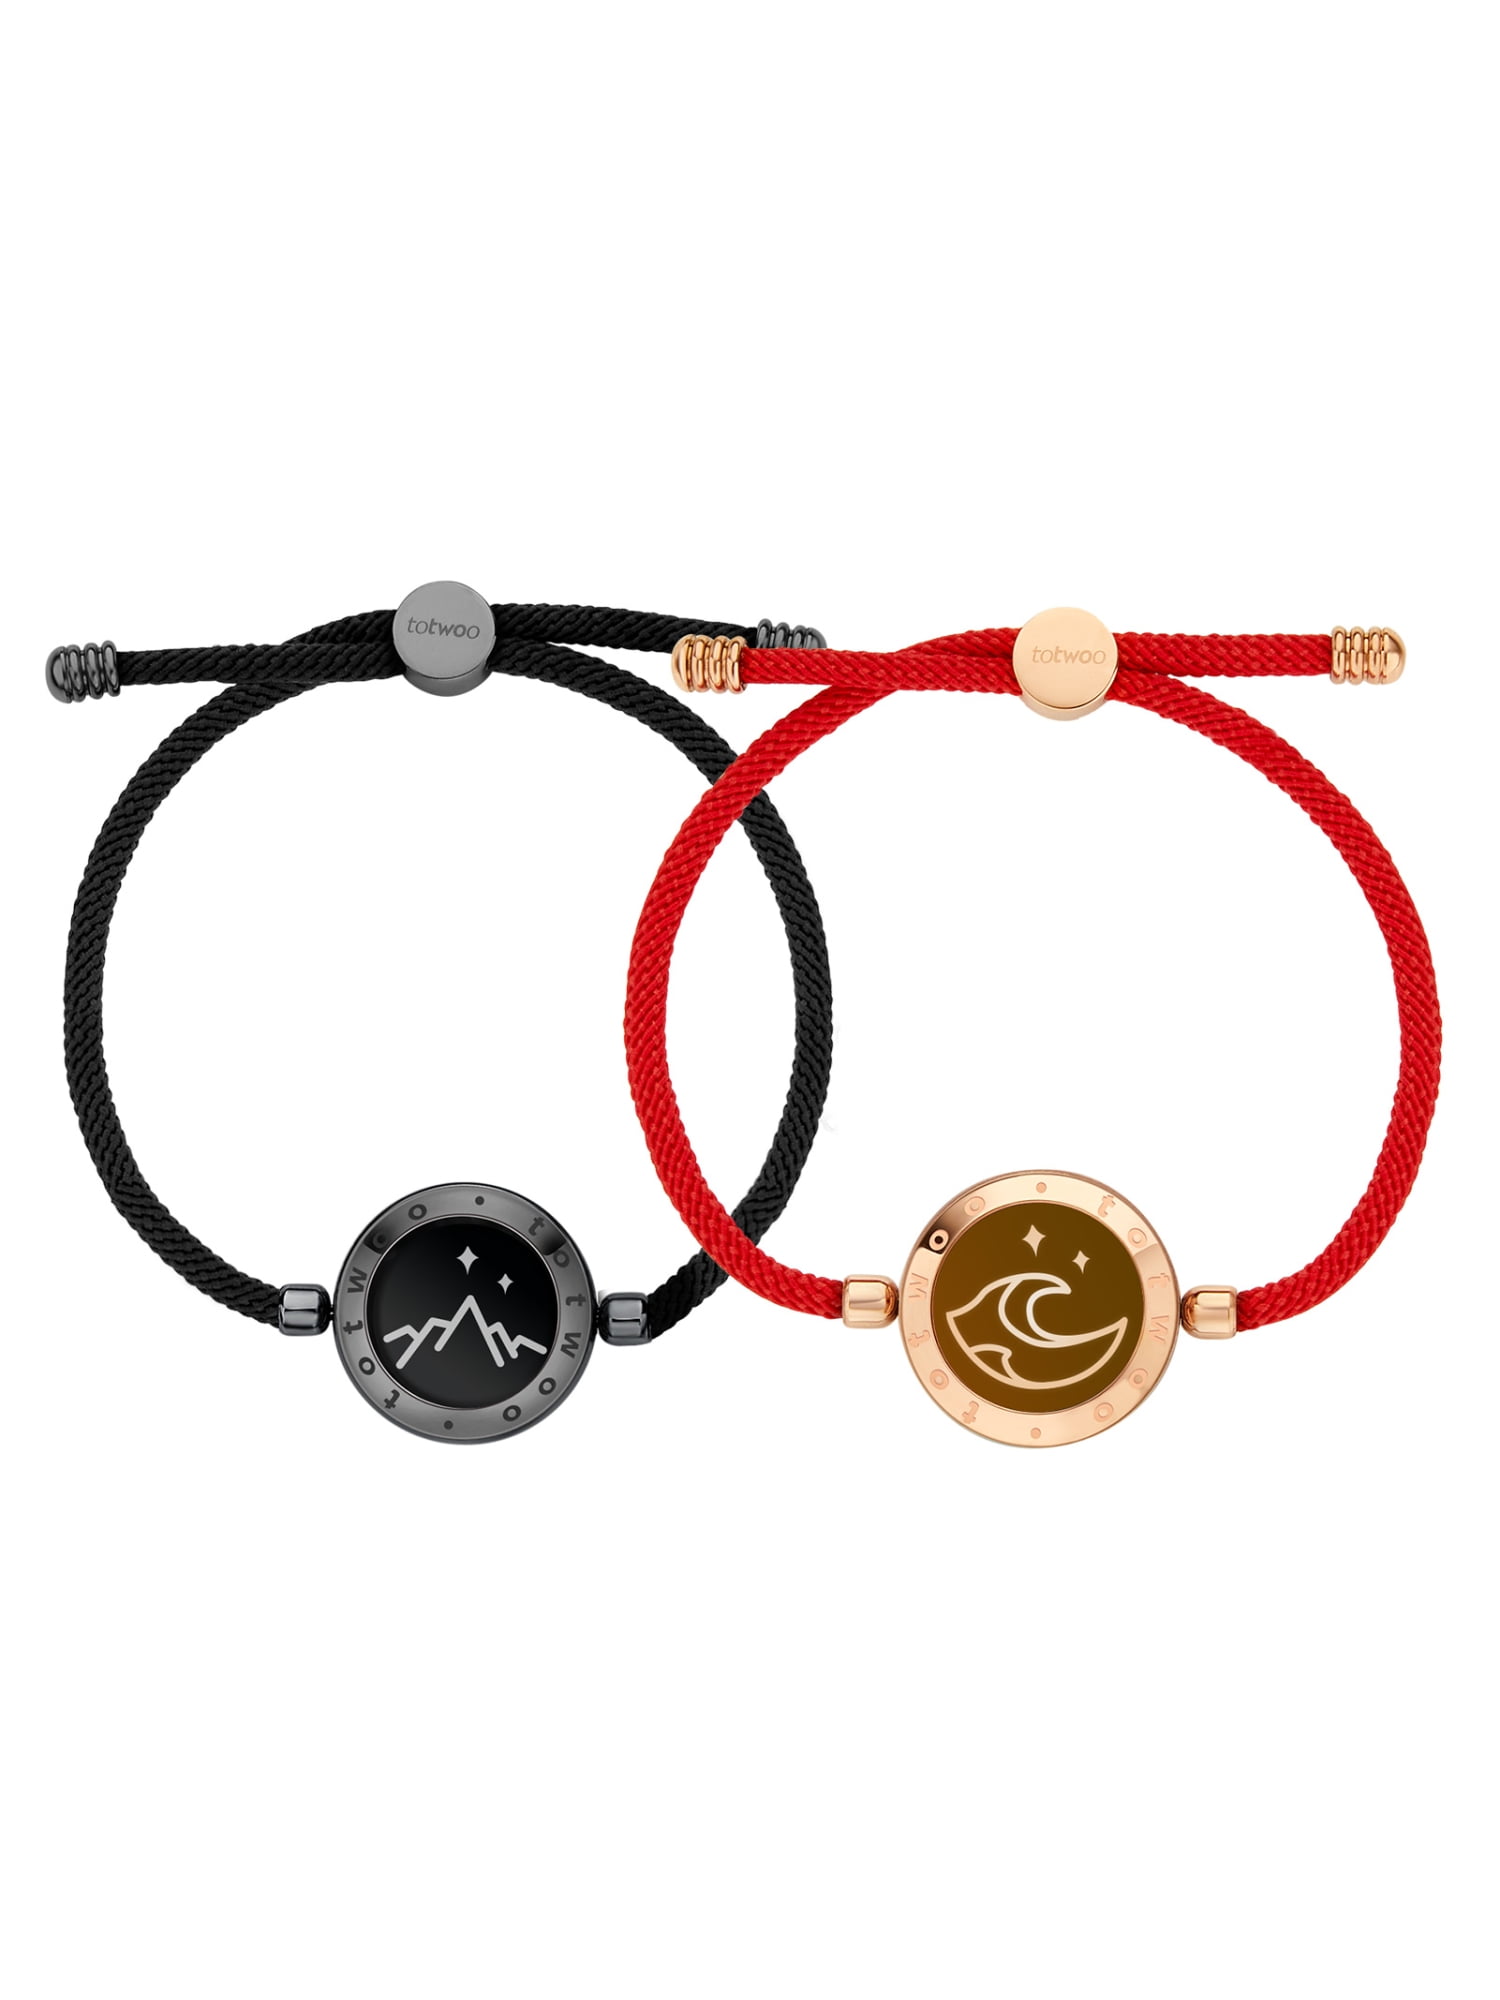 Share 85+ his and hers love bracelets latest - POPPY